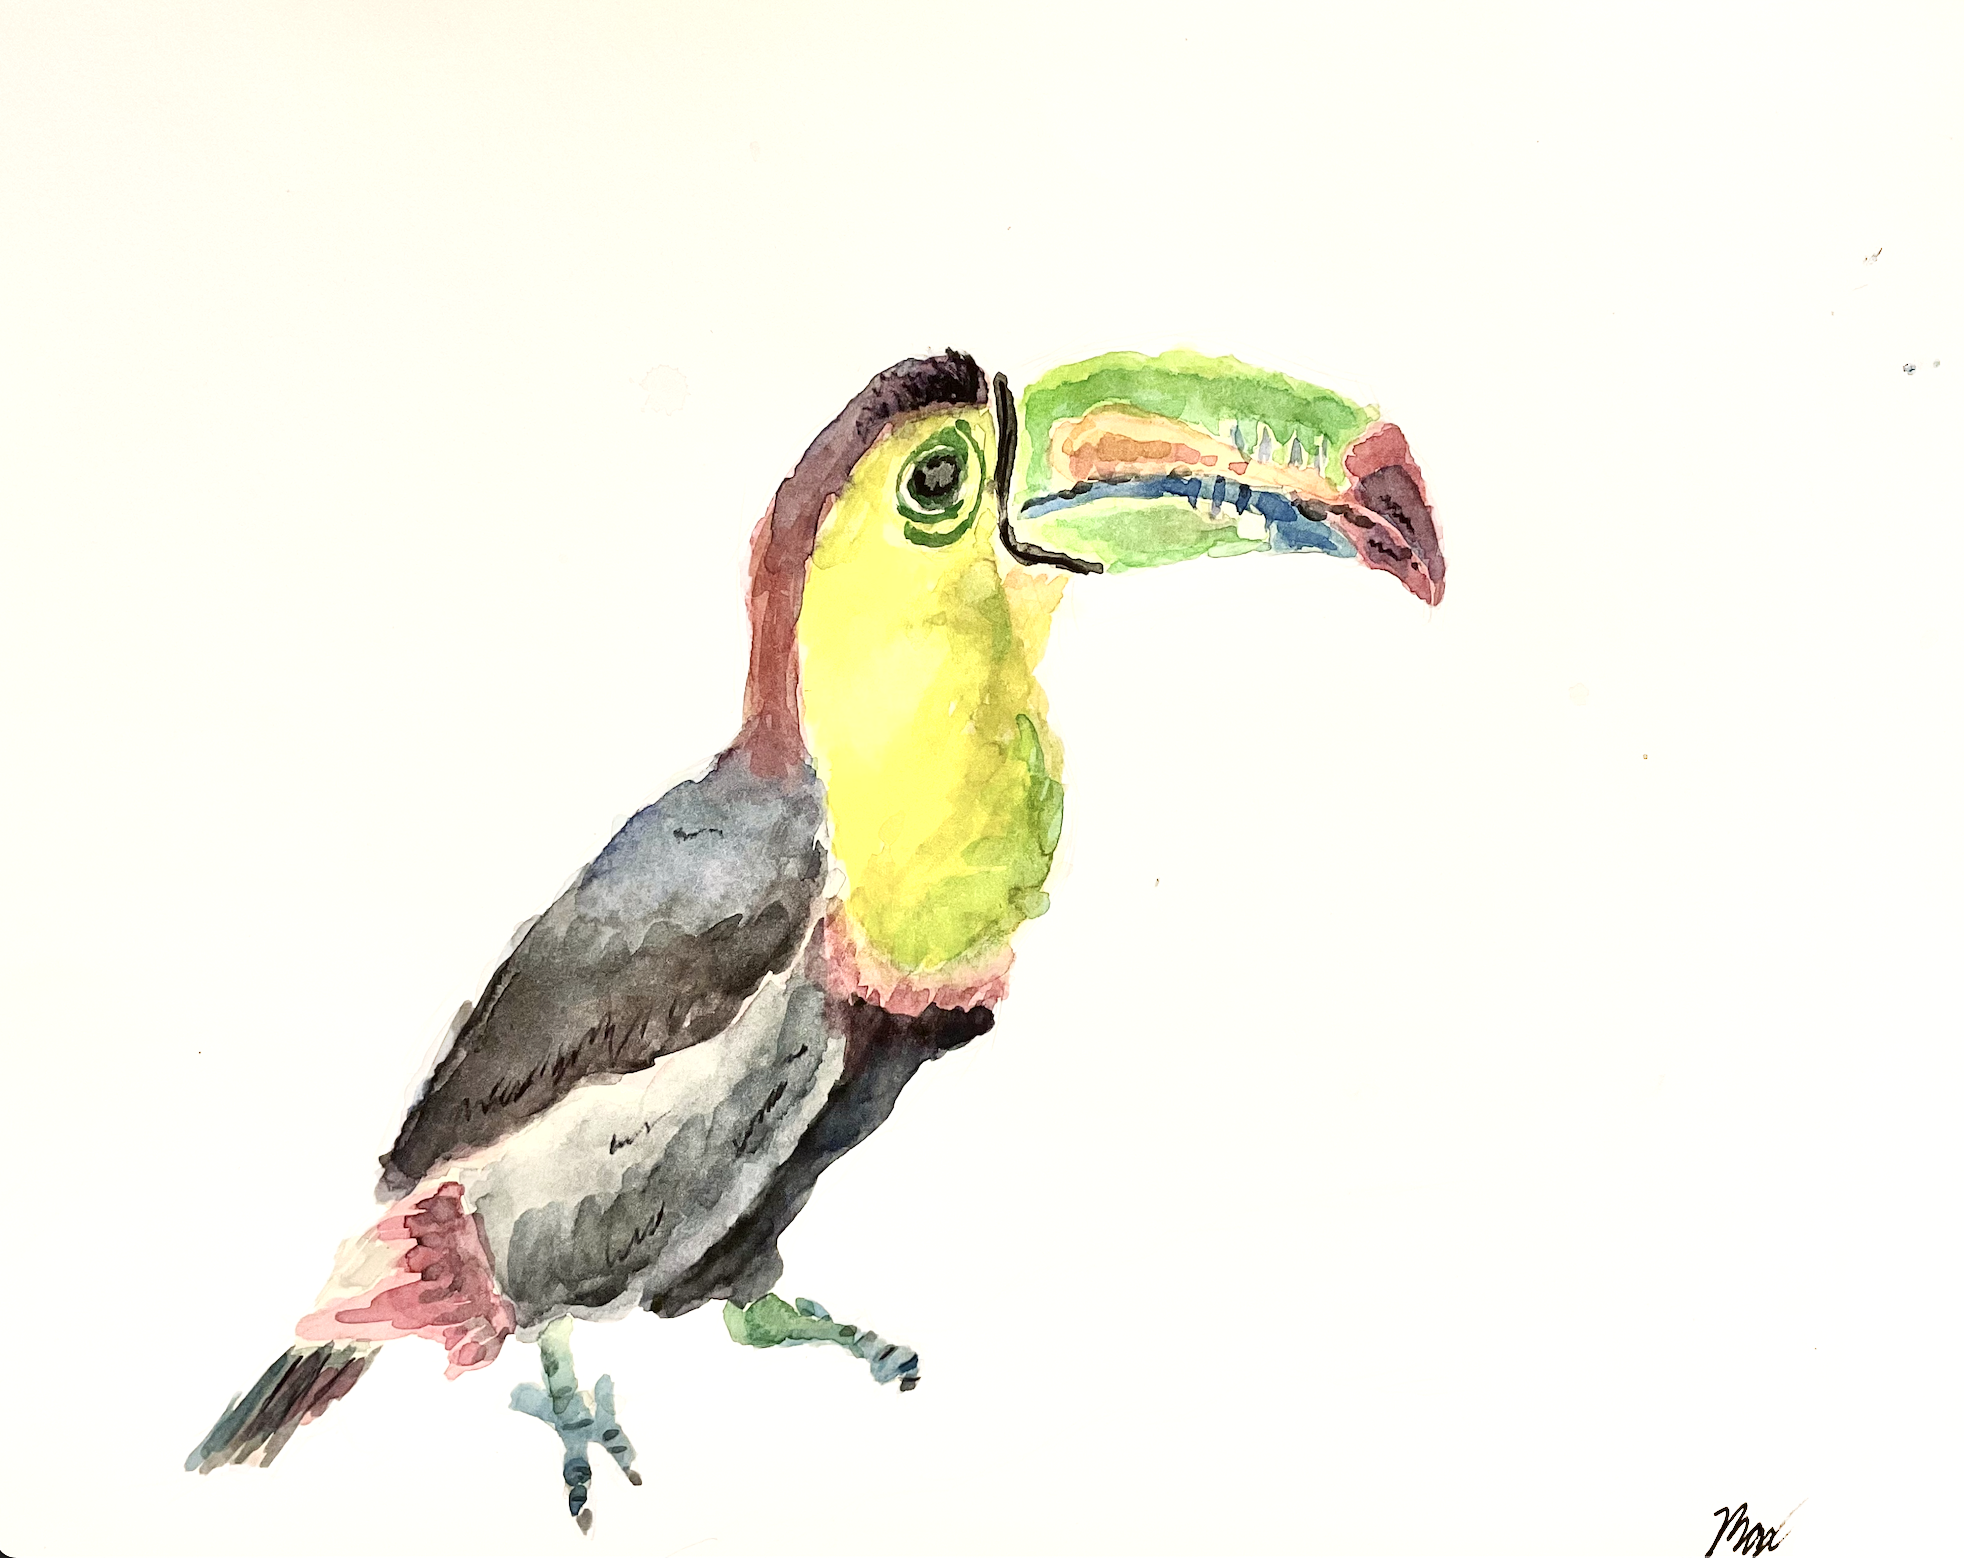 Toucan by Max, age 13